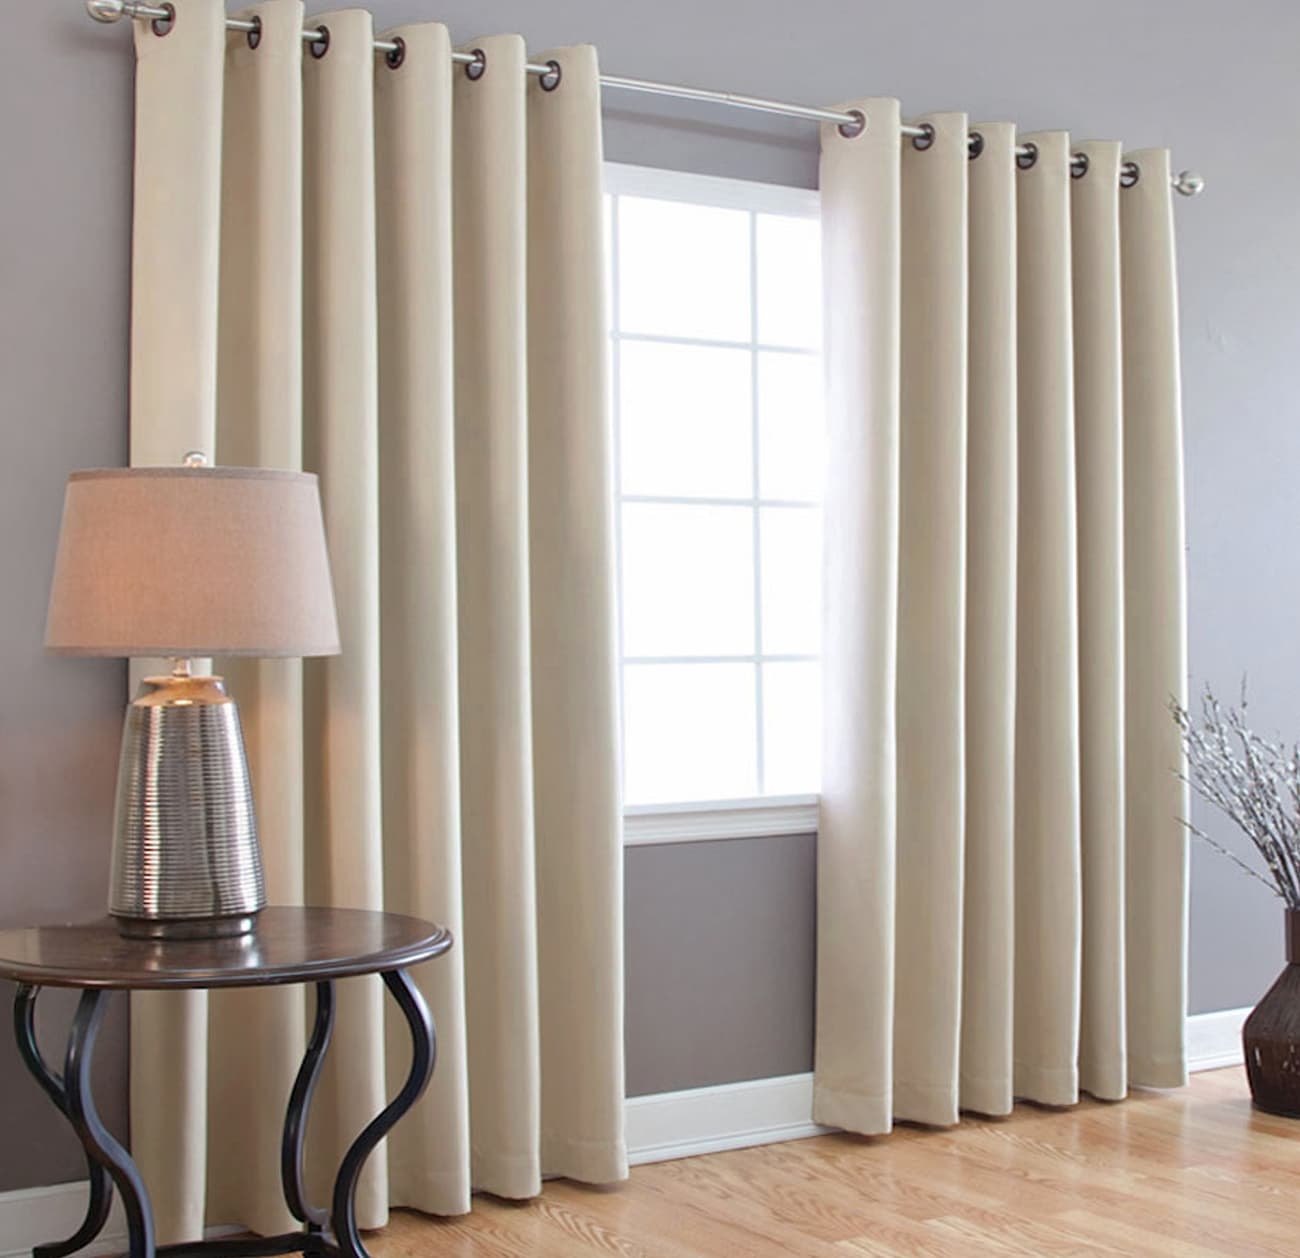 5 Most Affordable & Luxury Curtains in Abu Dhabi